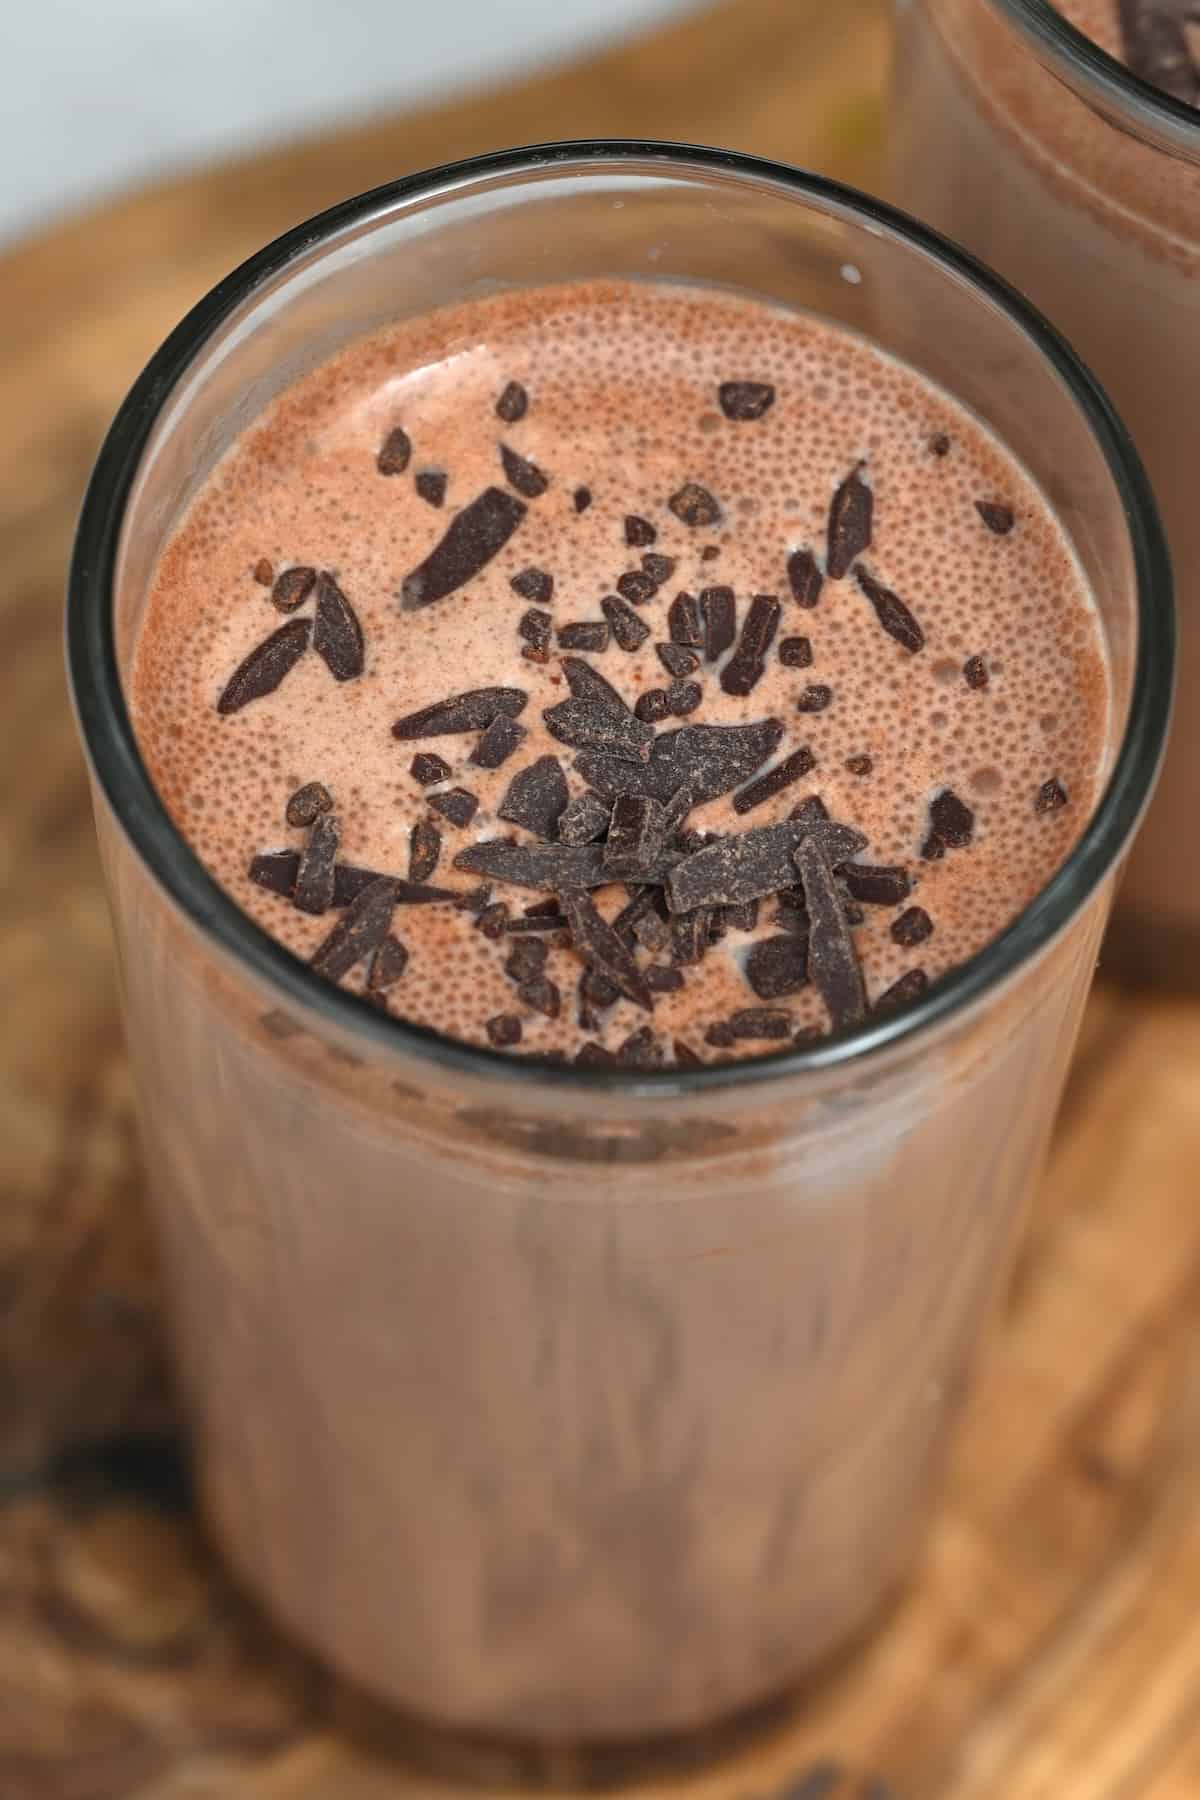 Chocolate milk topped with chocolate